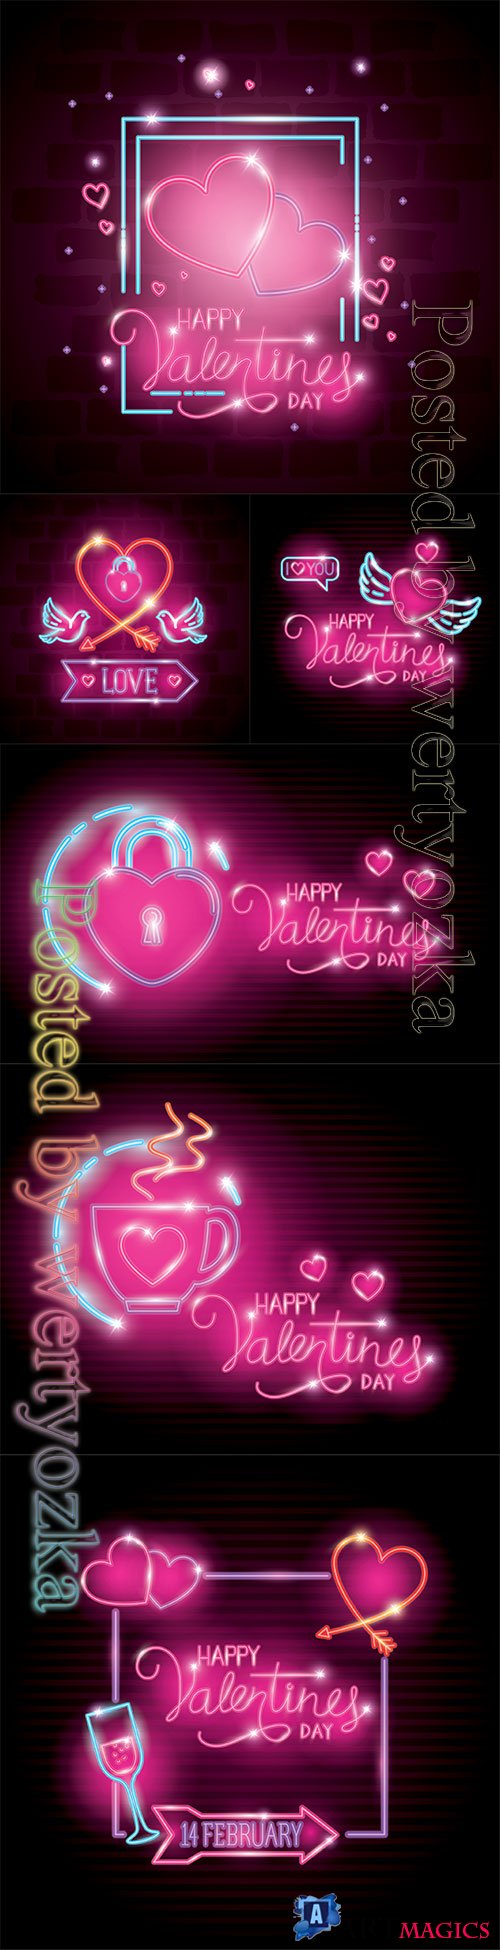 Happy valentines day with heart and wings of neon lights vector illustration design